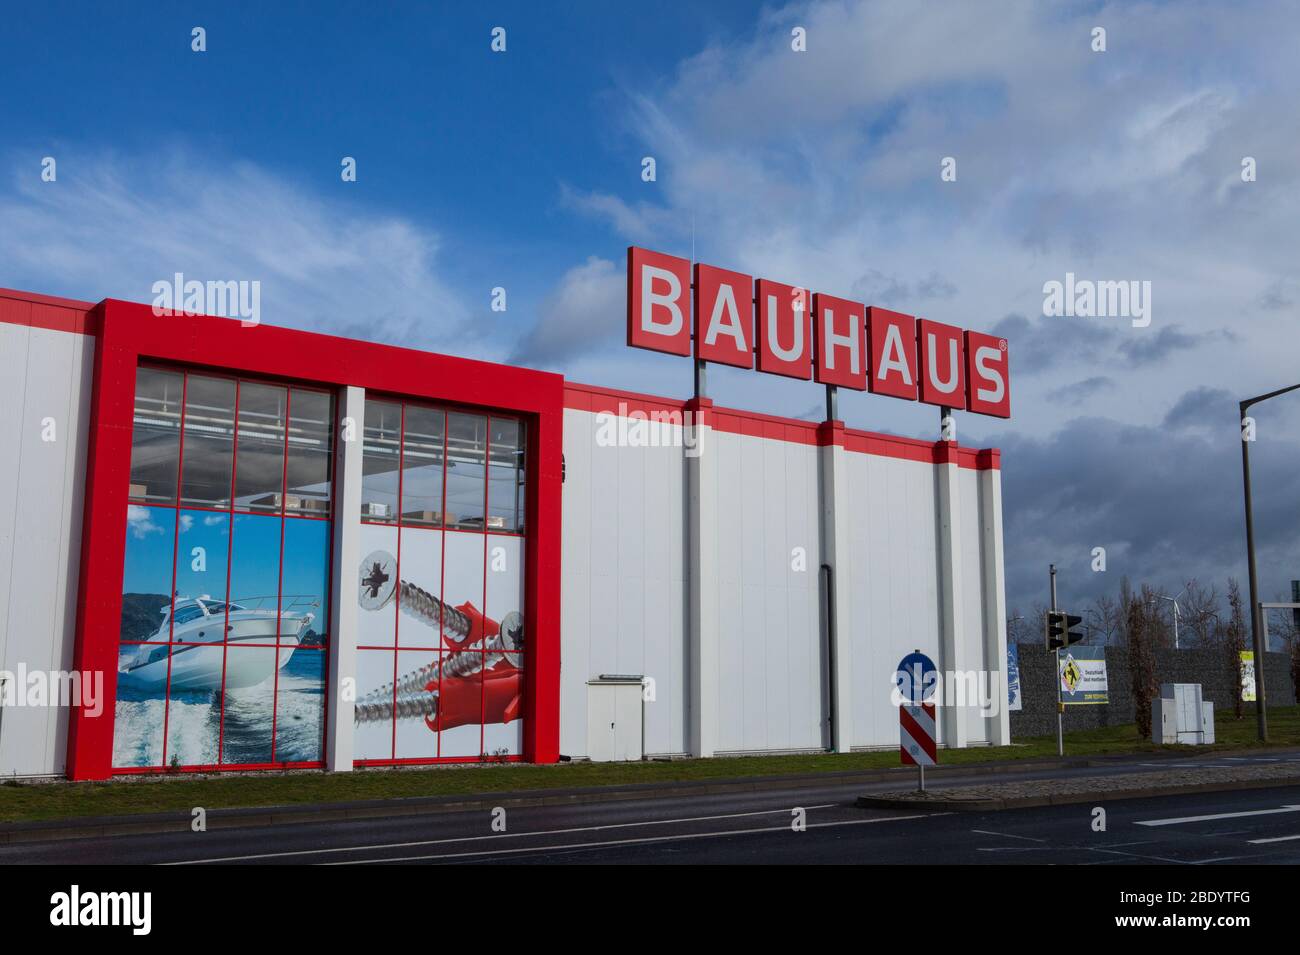 Leipzig,Germany-February 19,2020: Bauhaus is a Swiss-headquartered pan-European retail chain offering products for home improvement, gardening and wor Stock Photo